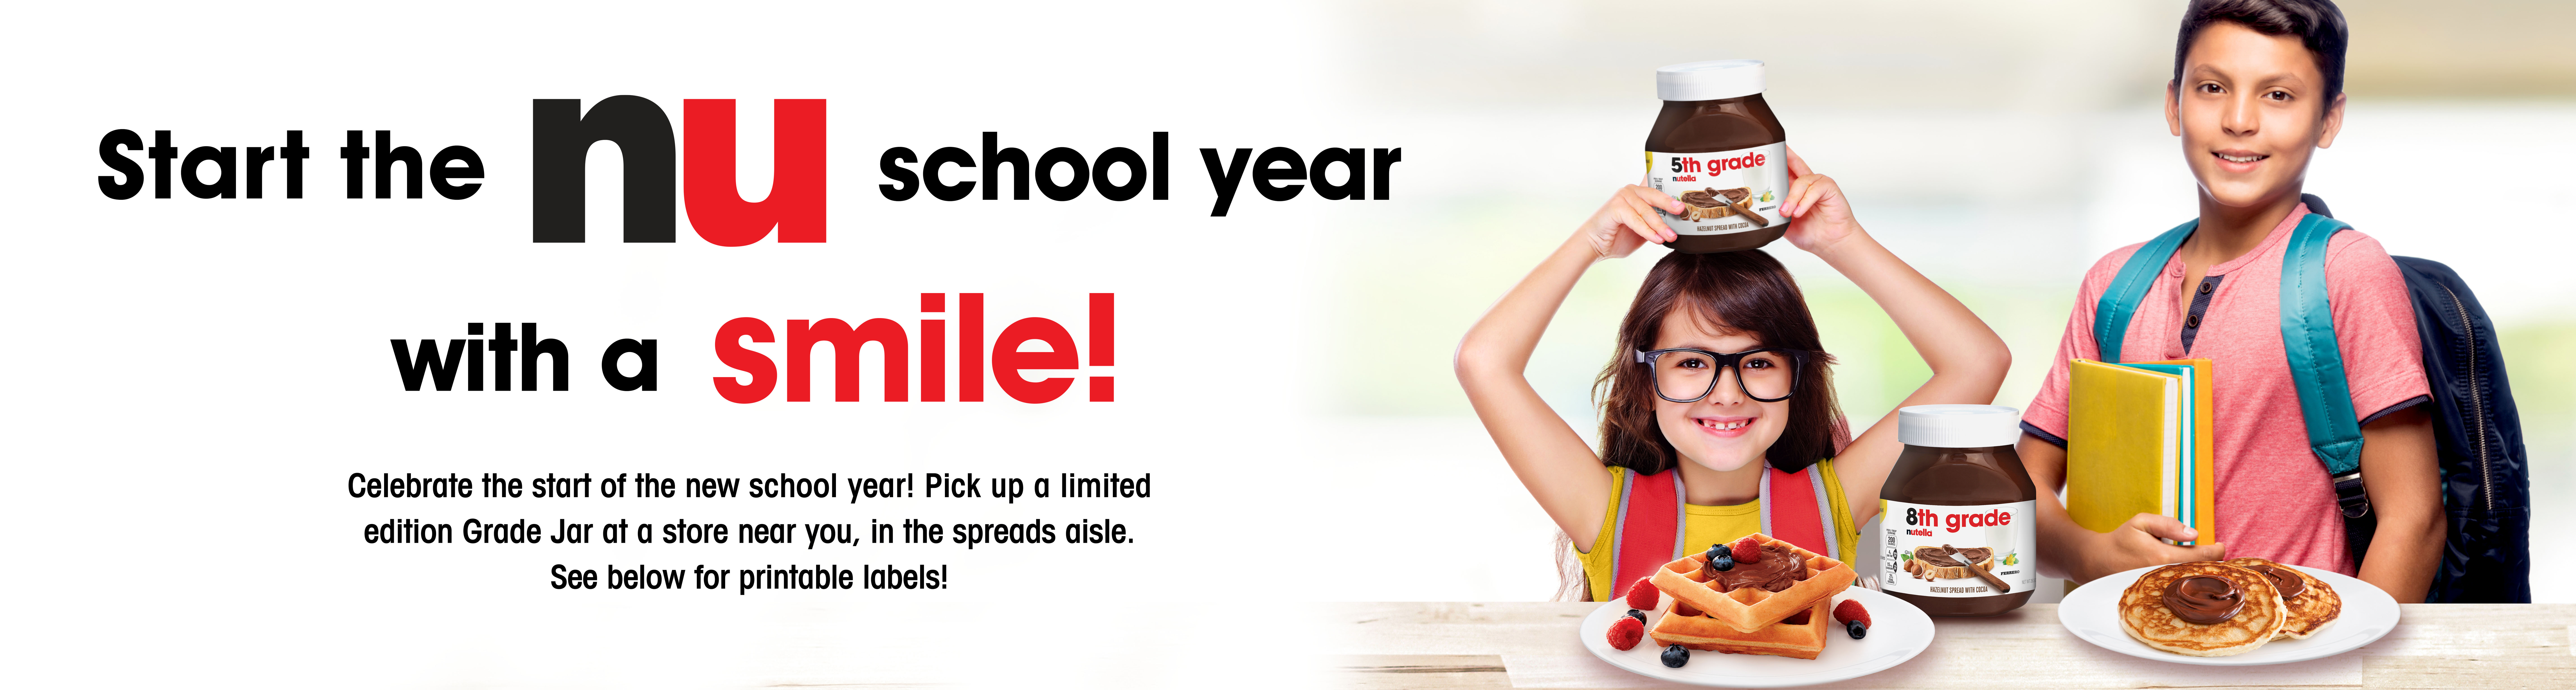 Start the nu School Year with a Smile!